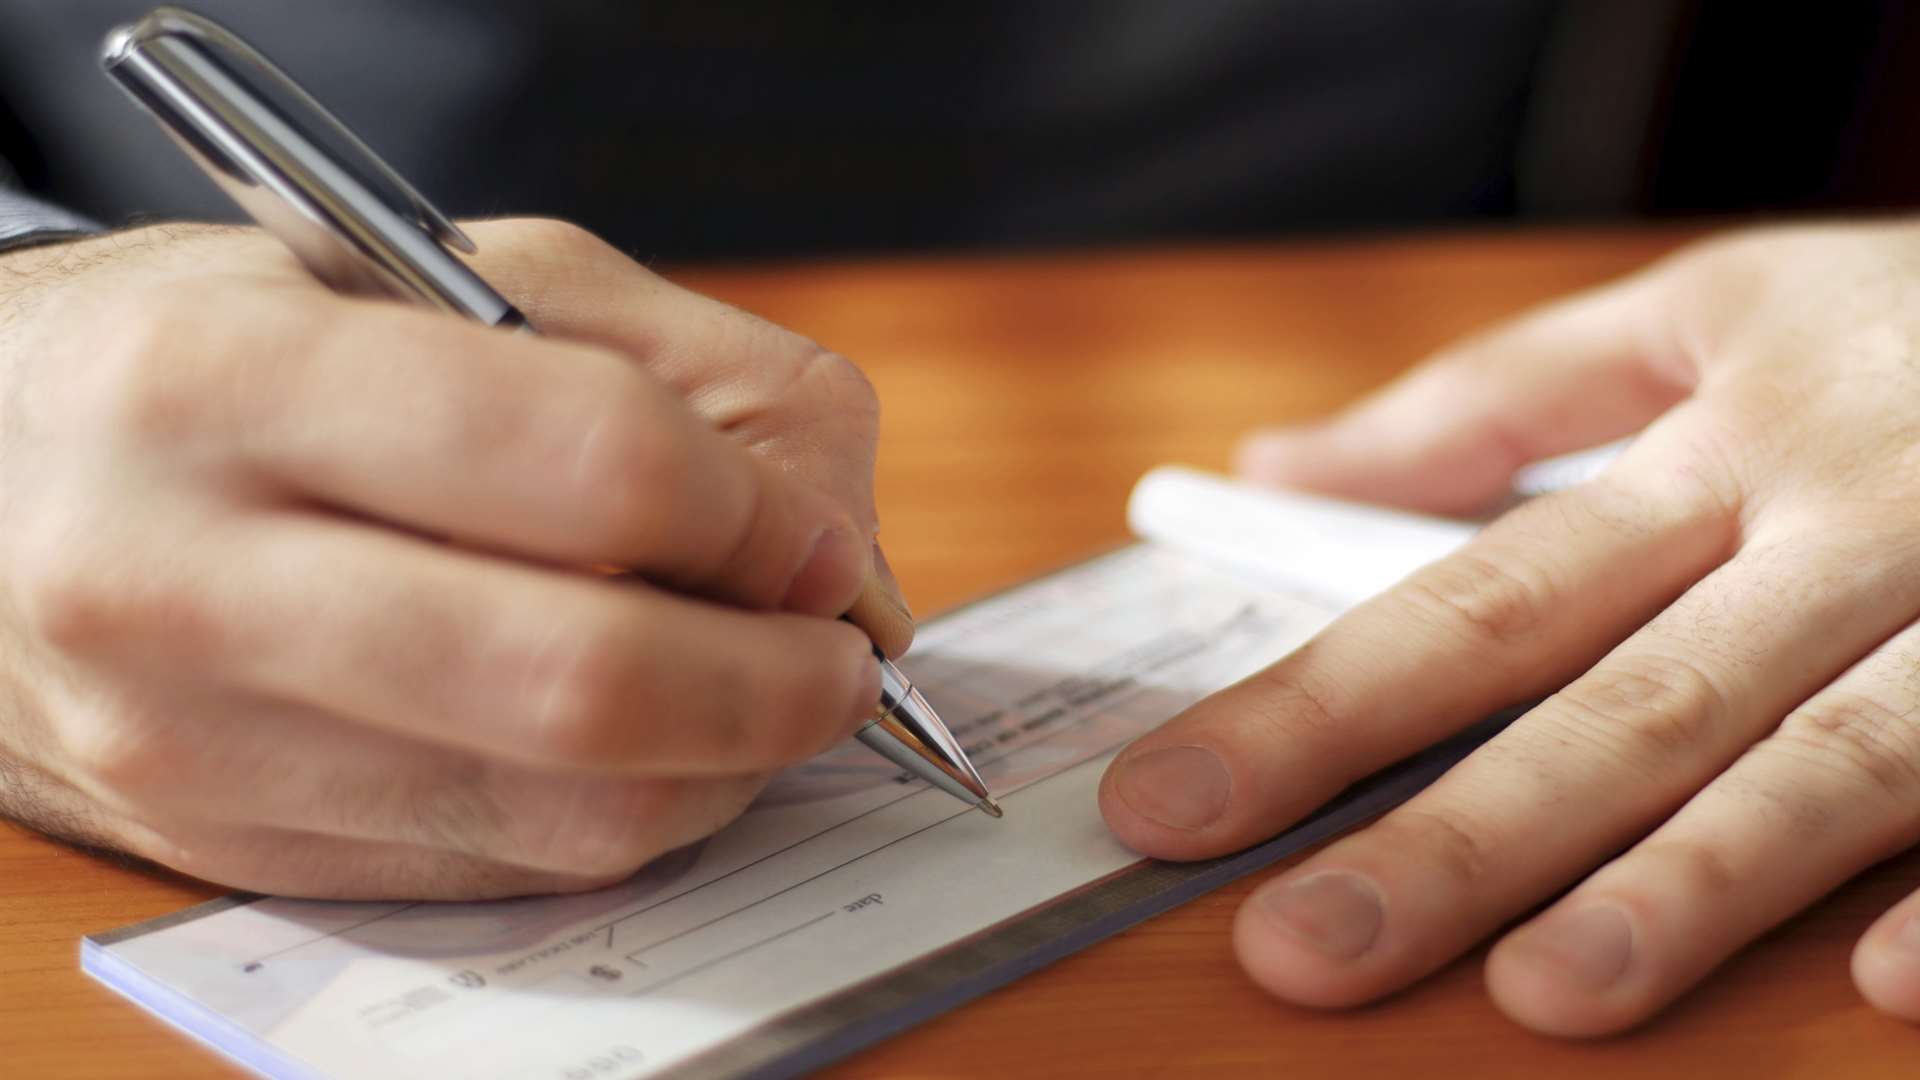 Gimigliano handled cheques worth nearly £100,000. Picture: Thinkstock.